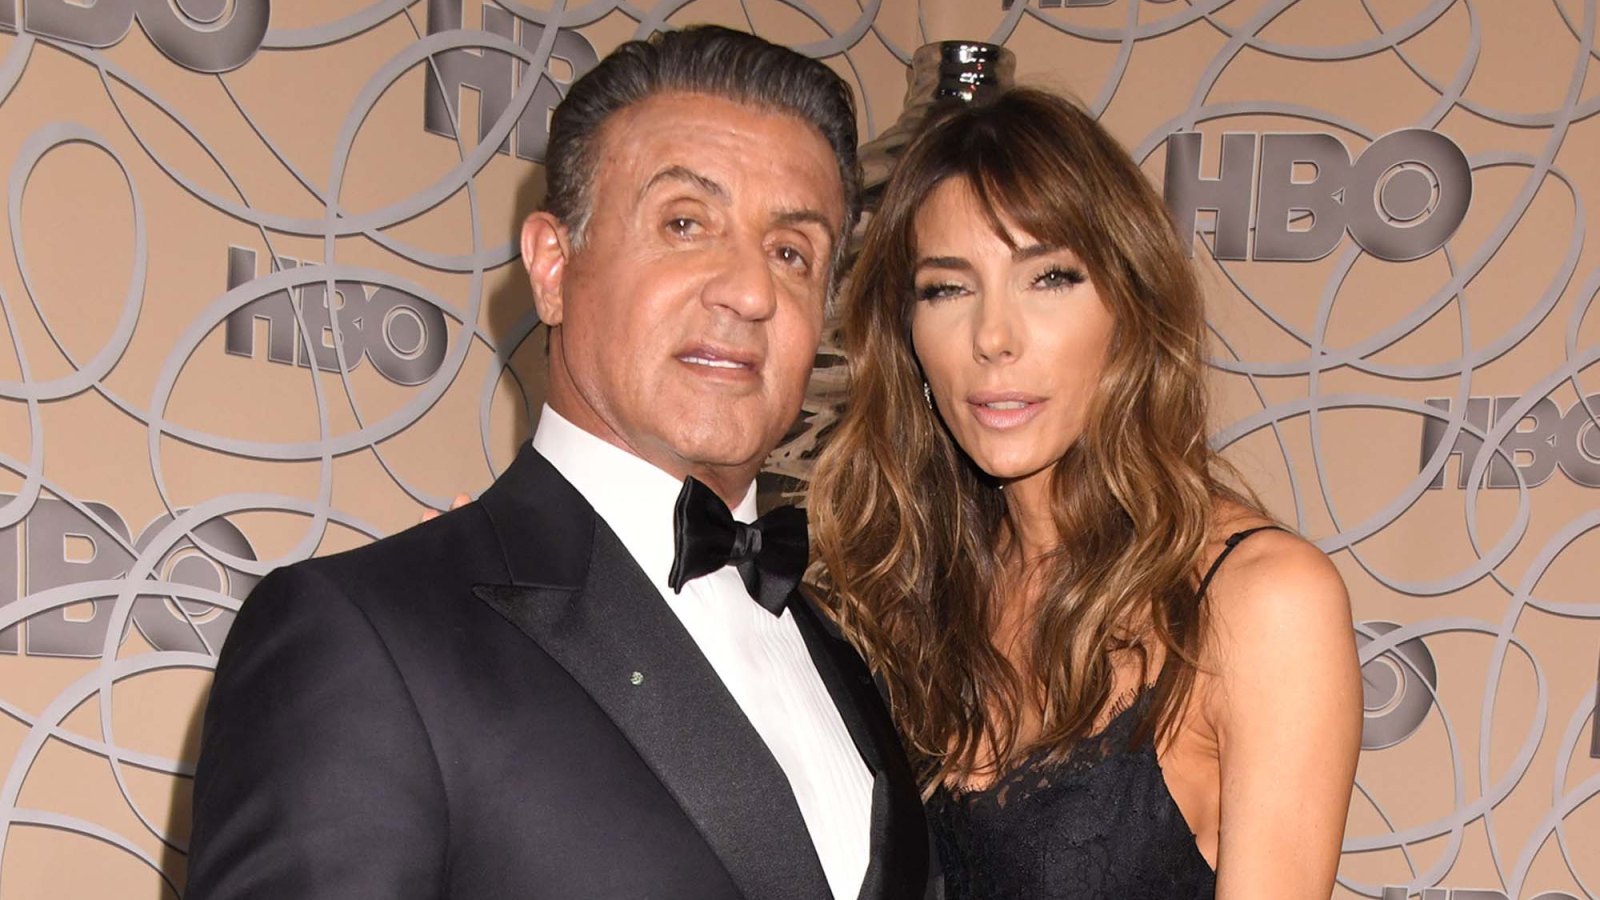 Sylvester-Stallone-Covers-Up-2nd-Tattoo-Ex-Jennifer-Flavin-Amid-Divorce-000